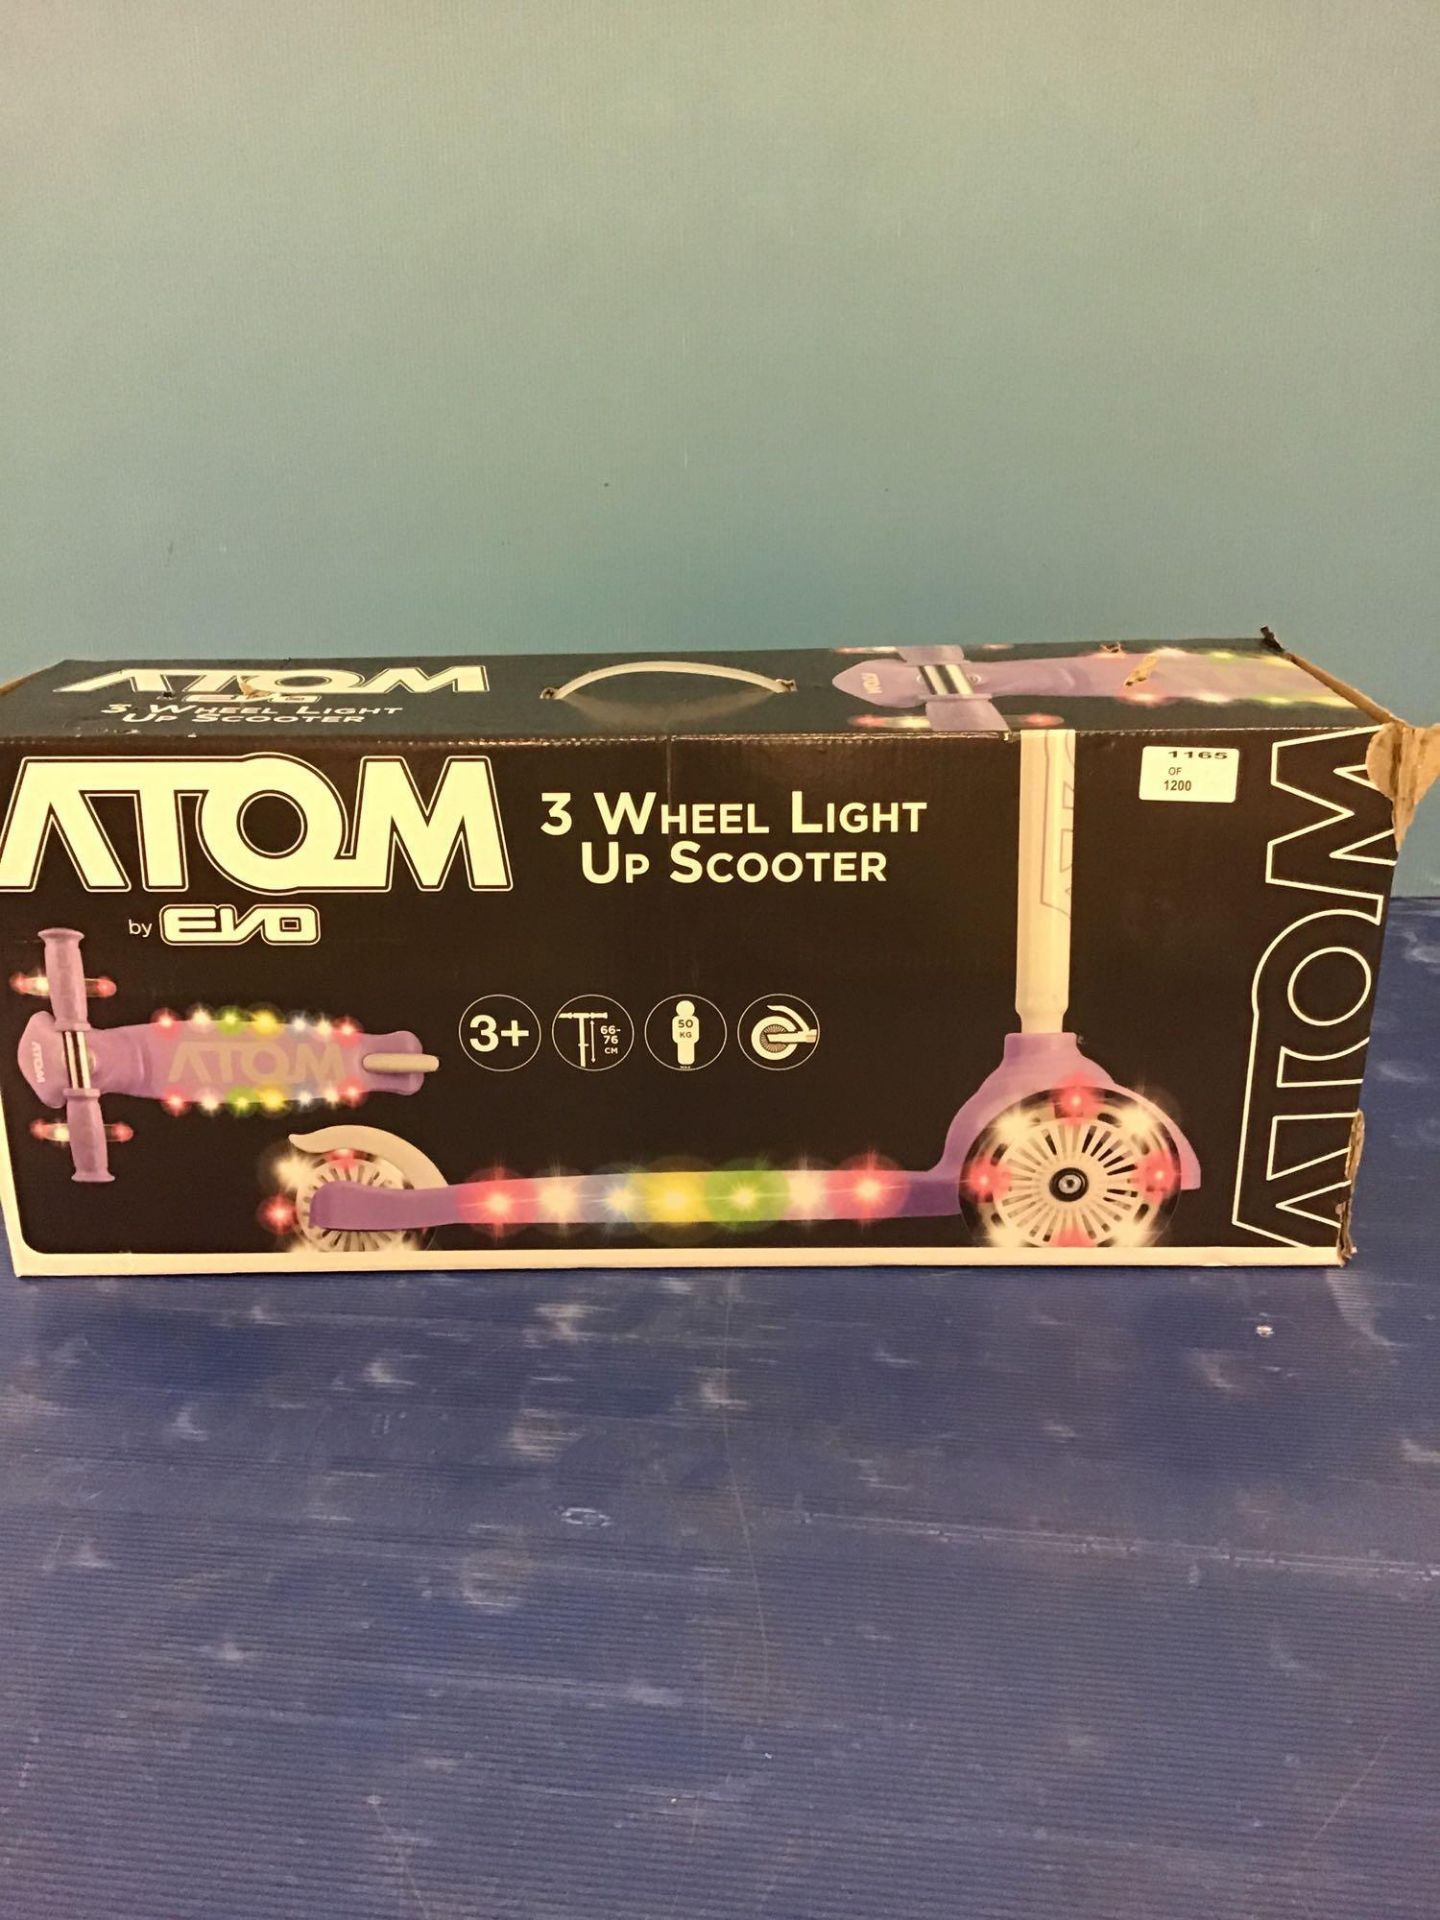 Atom Light Up Tri Scooter 893/5641 £24.99 RRP - Image 2 of 5